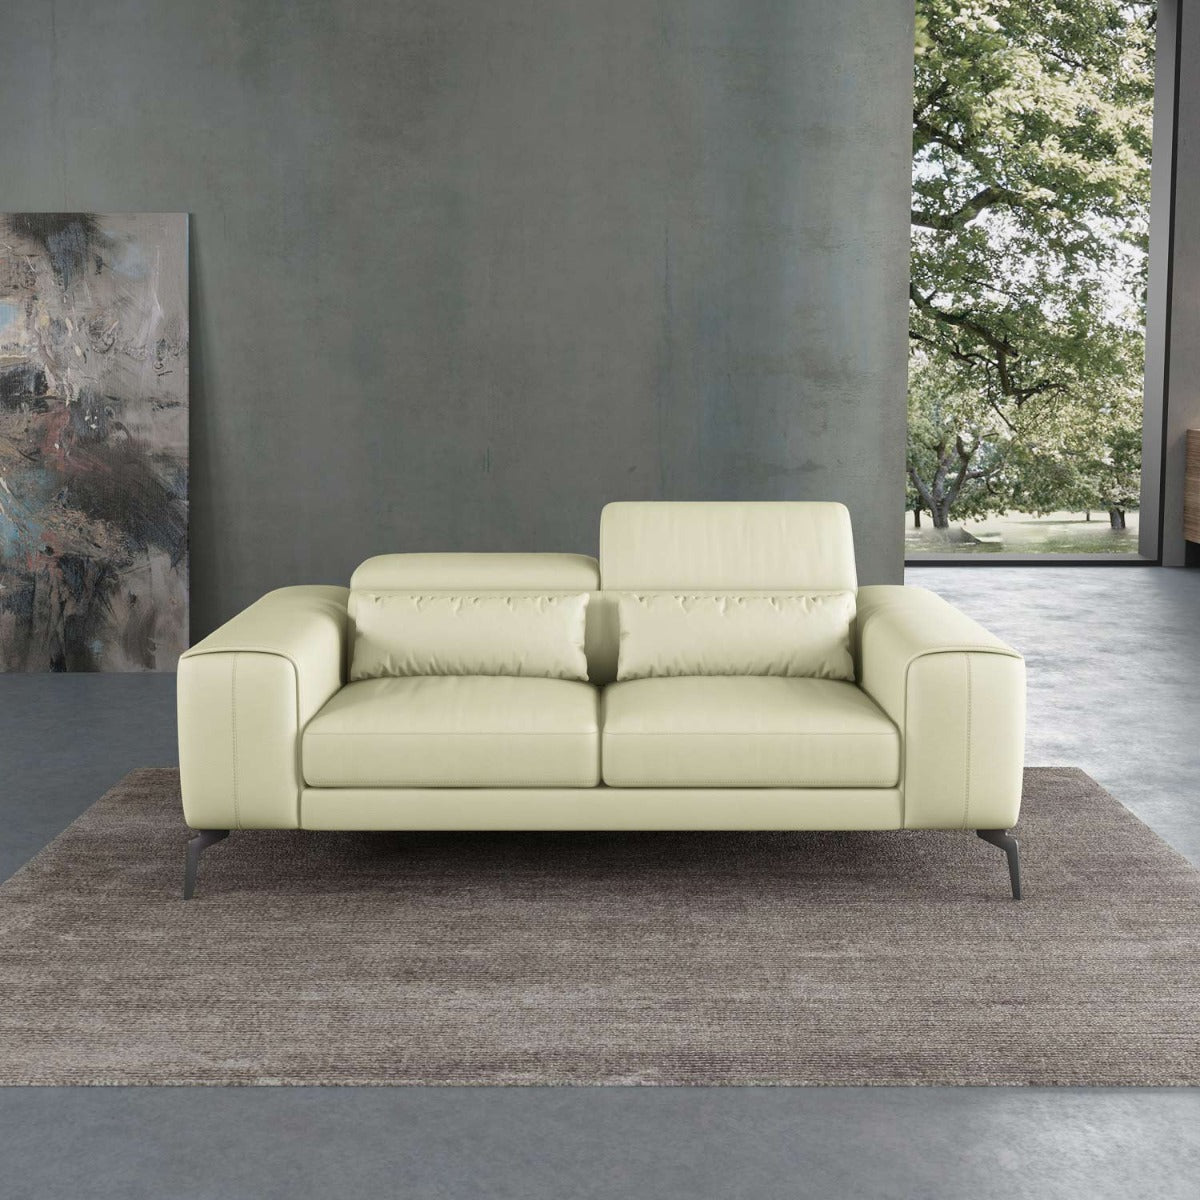 European Furniture - Cavour Loveseat in Off Whte - 12552-L - New Star Living